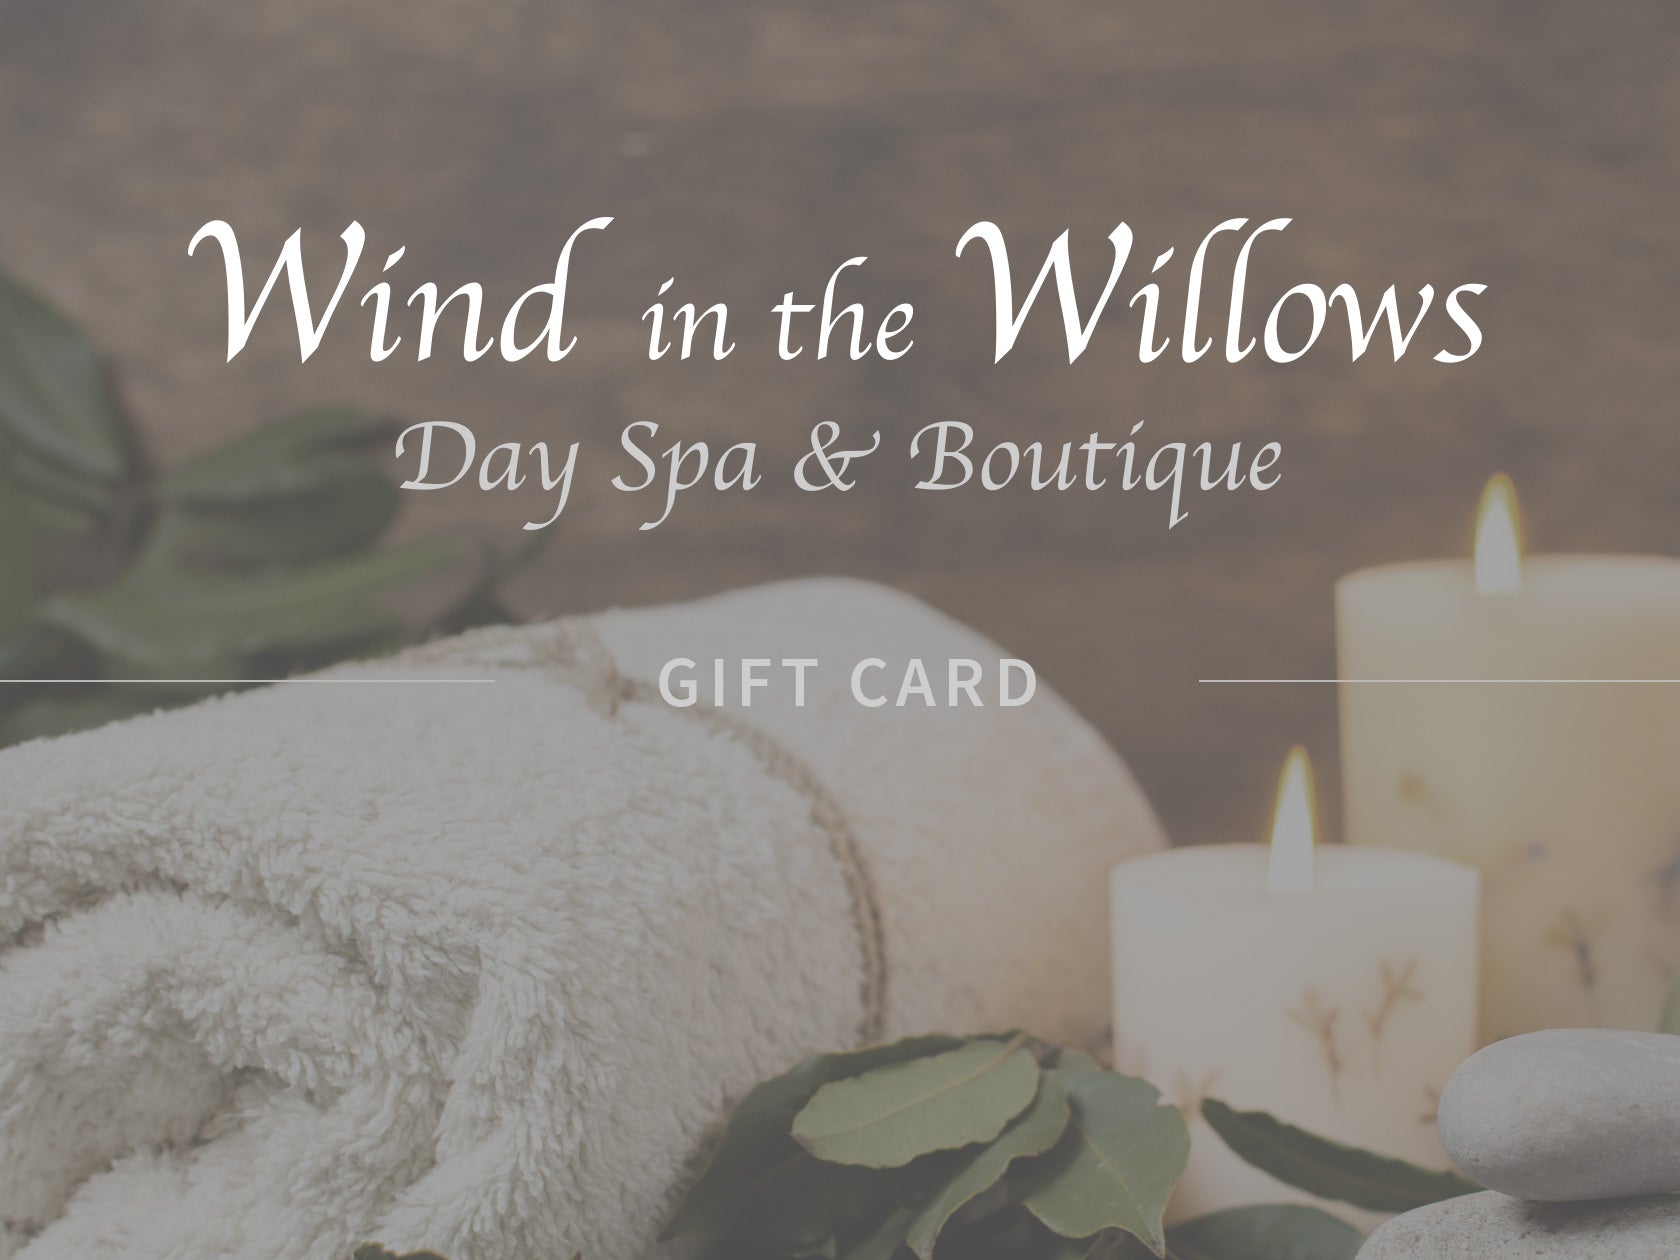 Spa & Boutique Gift Cards